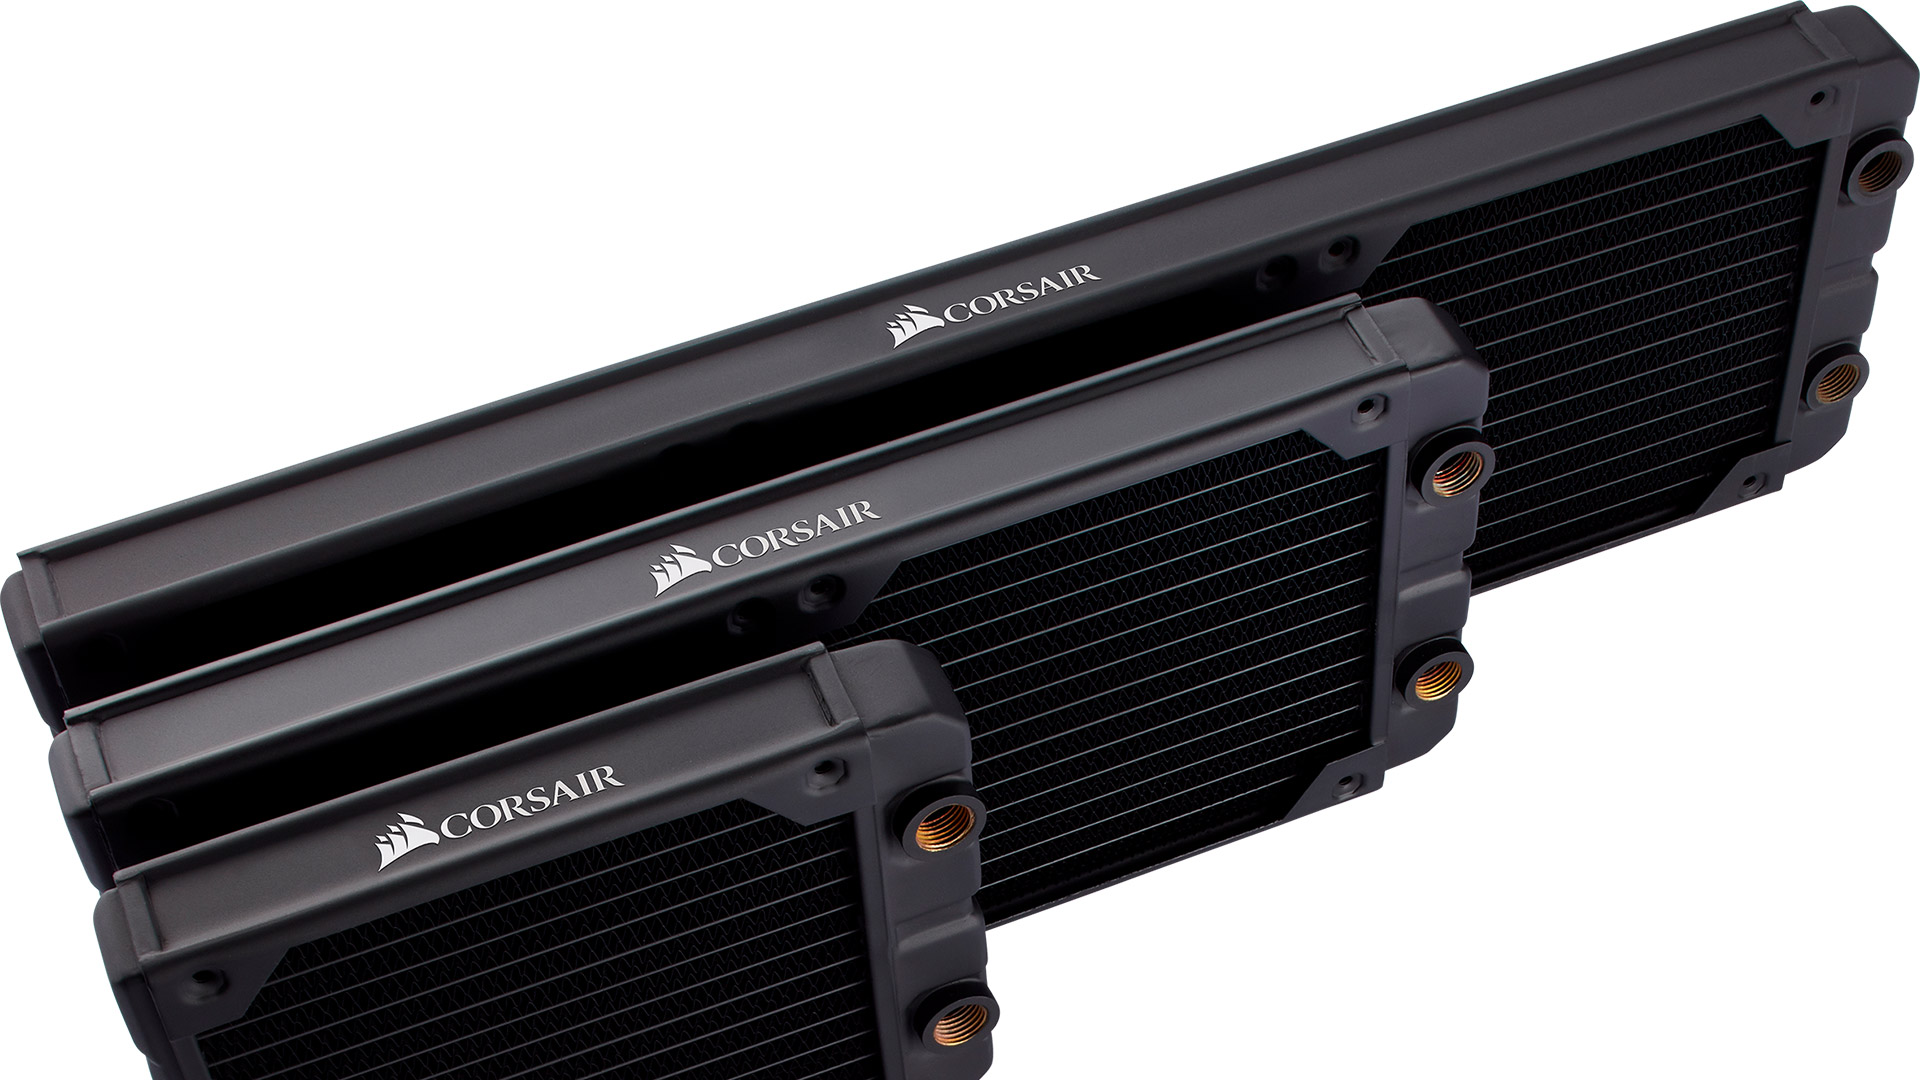 Hydro X Series XR5 140mm Water Cooling Radiator